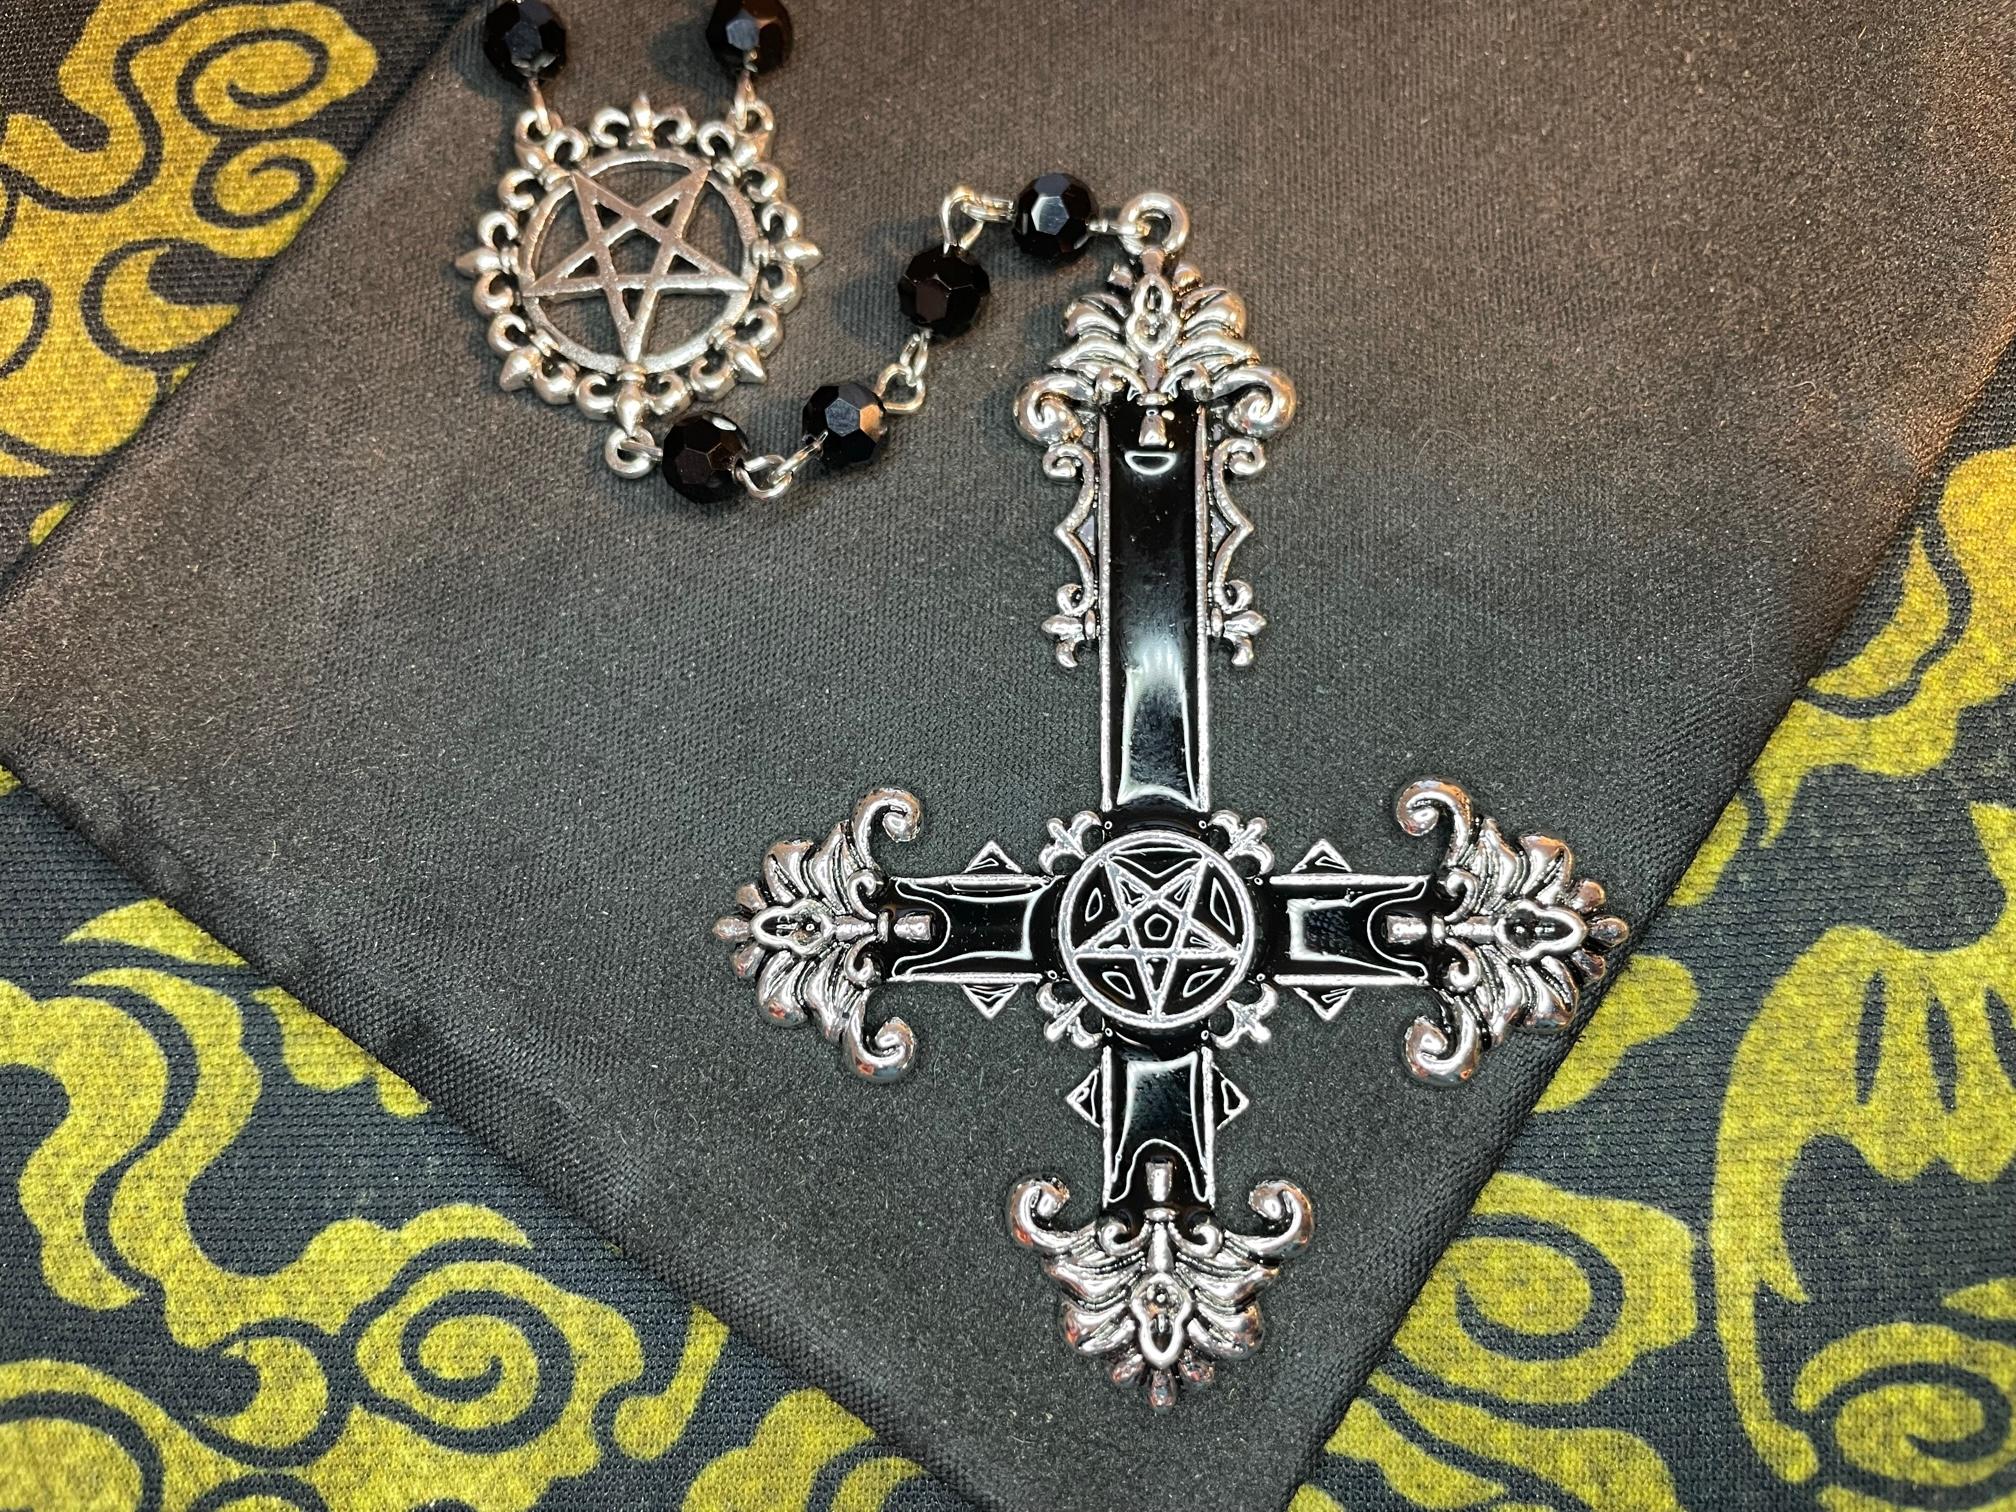 satanic rosary inverted pentagram ornate upside down cross 666 pendant witchcraft black magic wiccan occult darkness jewelry